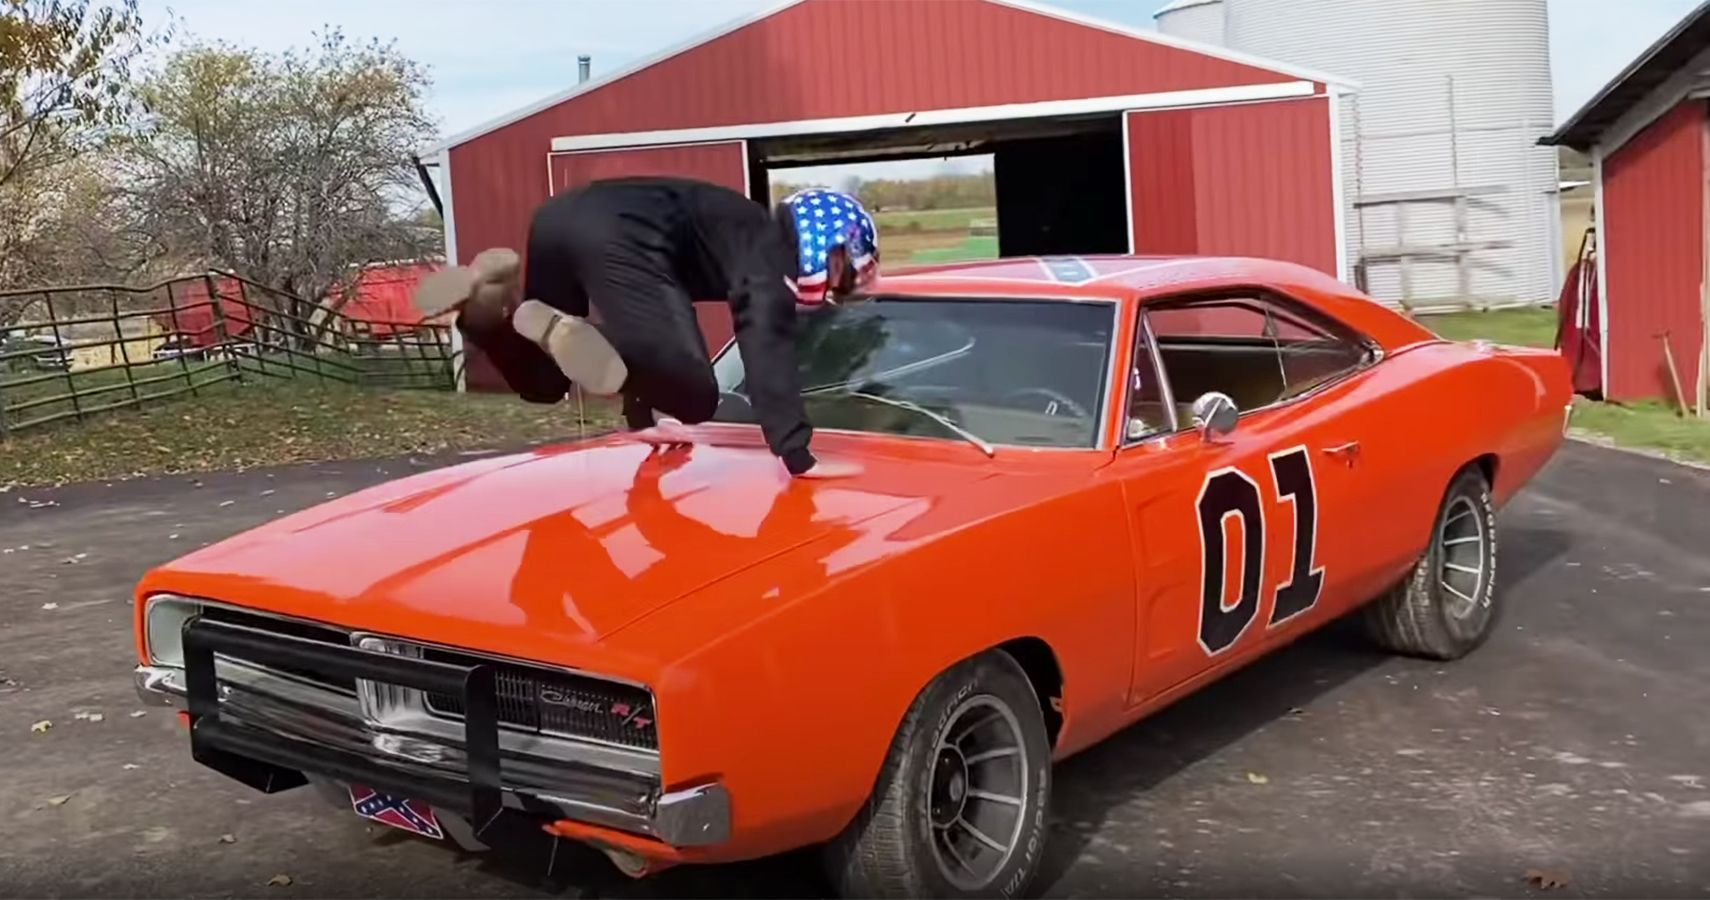 WhistlinDiesel Buys General Lee Replica To Continue Where 